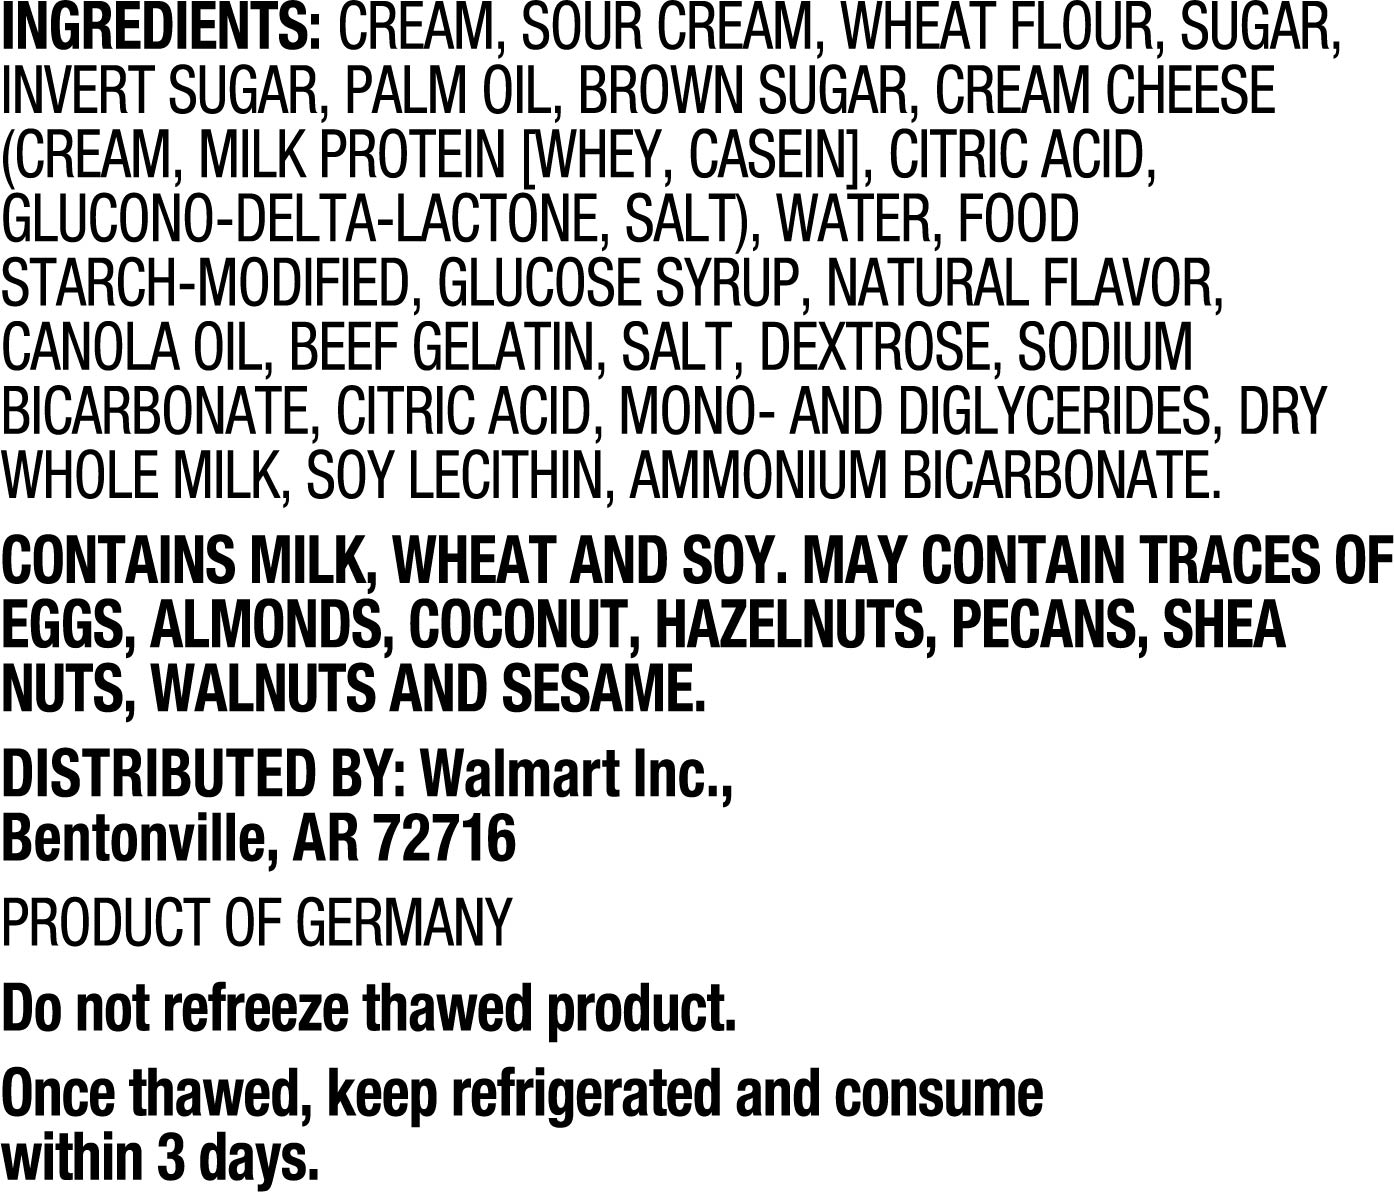 Great Value Whipped Cheesecake, Frozen Dessert, 24 oz, Made with Real Cream Cheese, No HFCS, Box (Frozen) - image 4 of 5